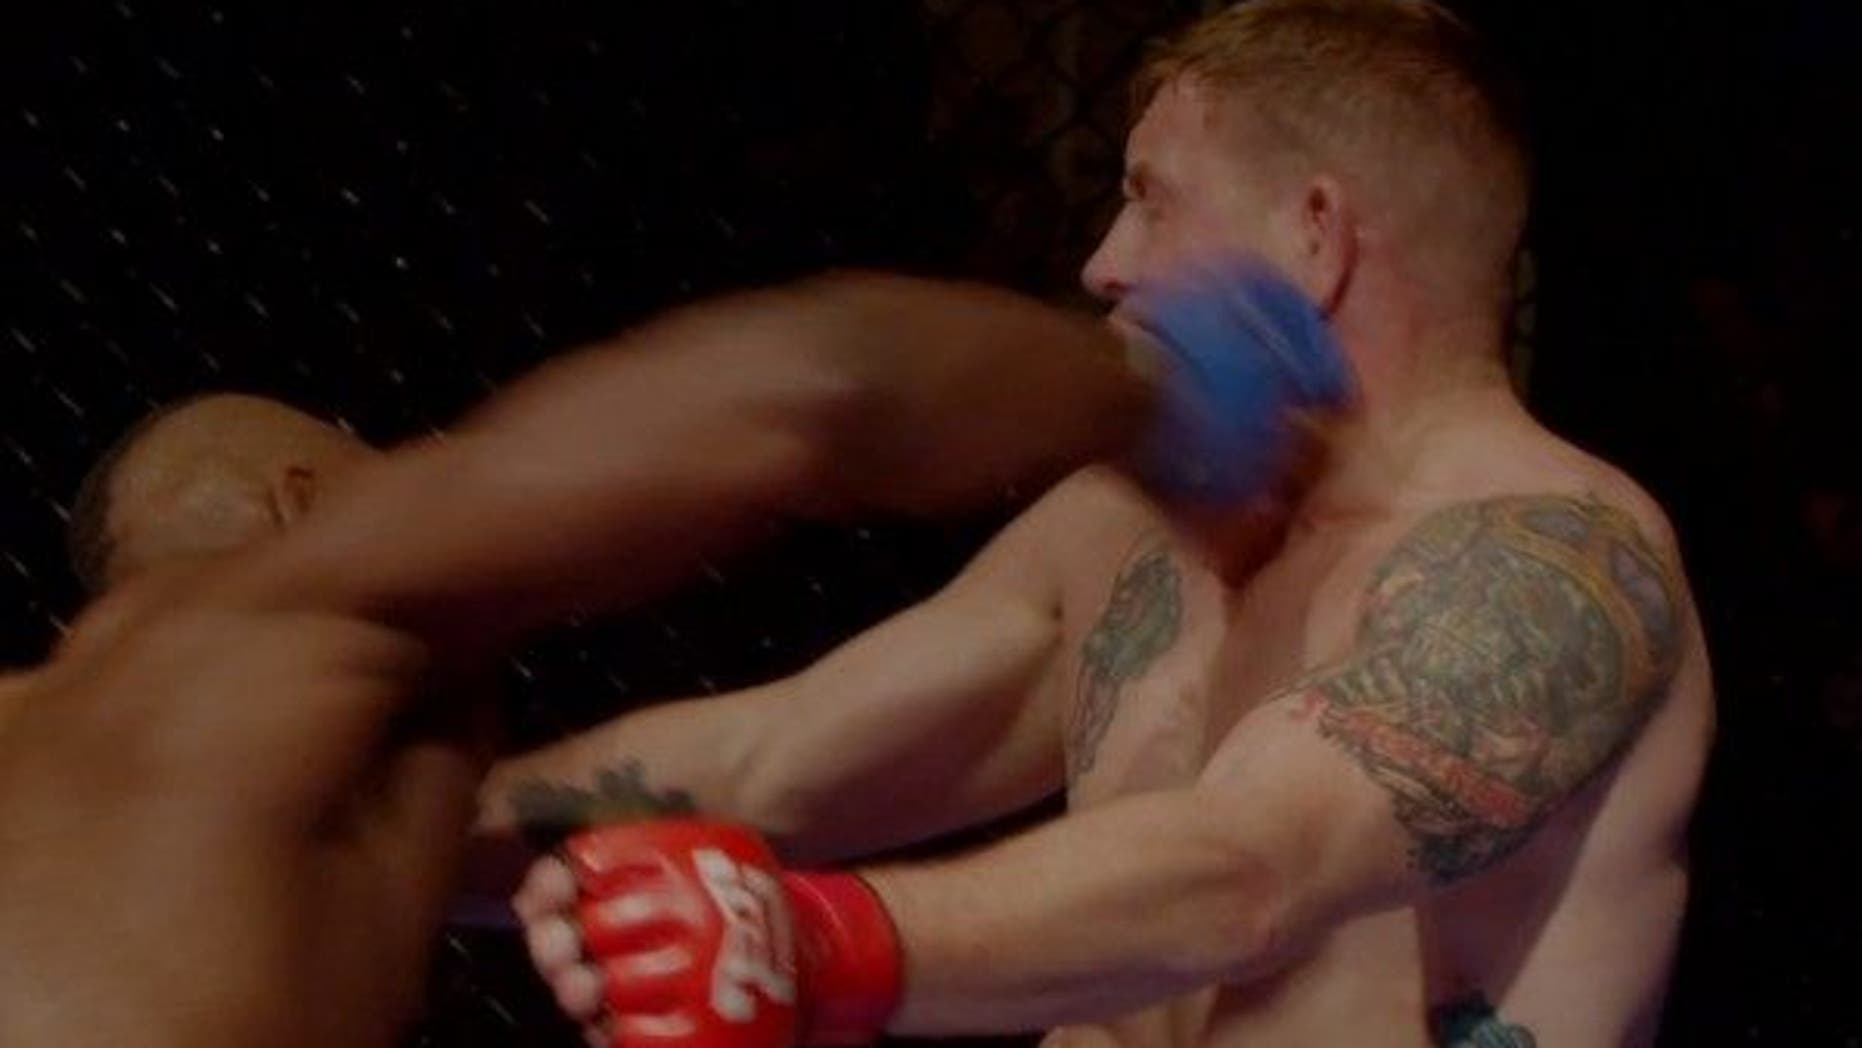 ‘Fight Church’ Documentary Featuring MMABattling Pastors to Premiere